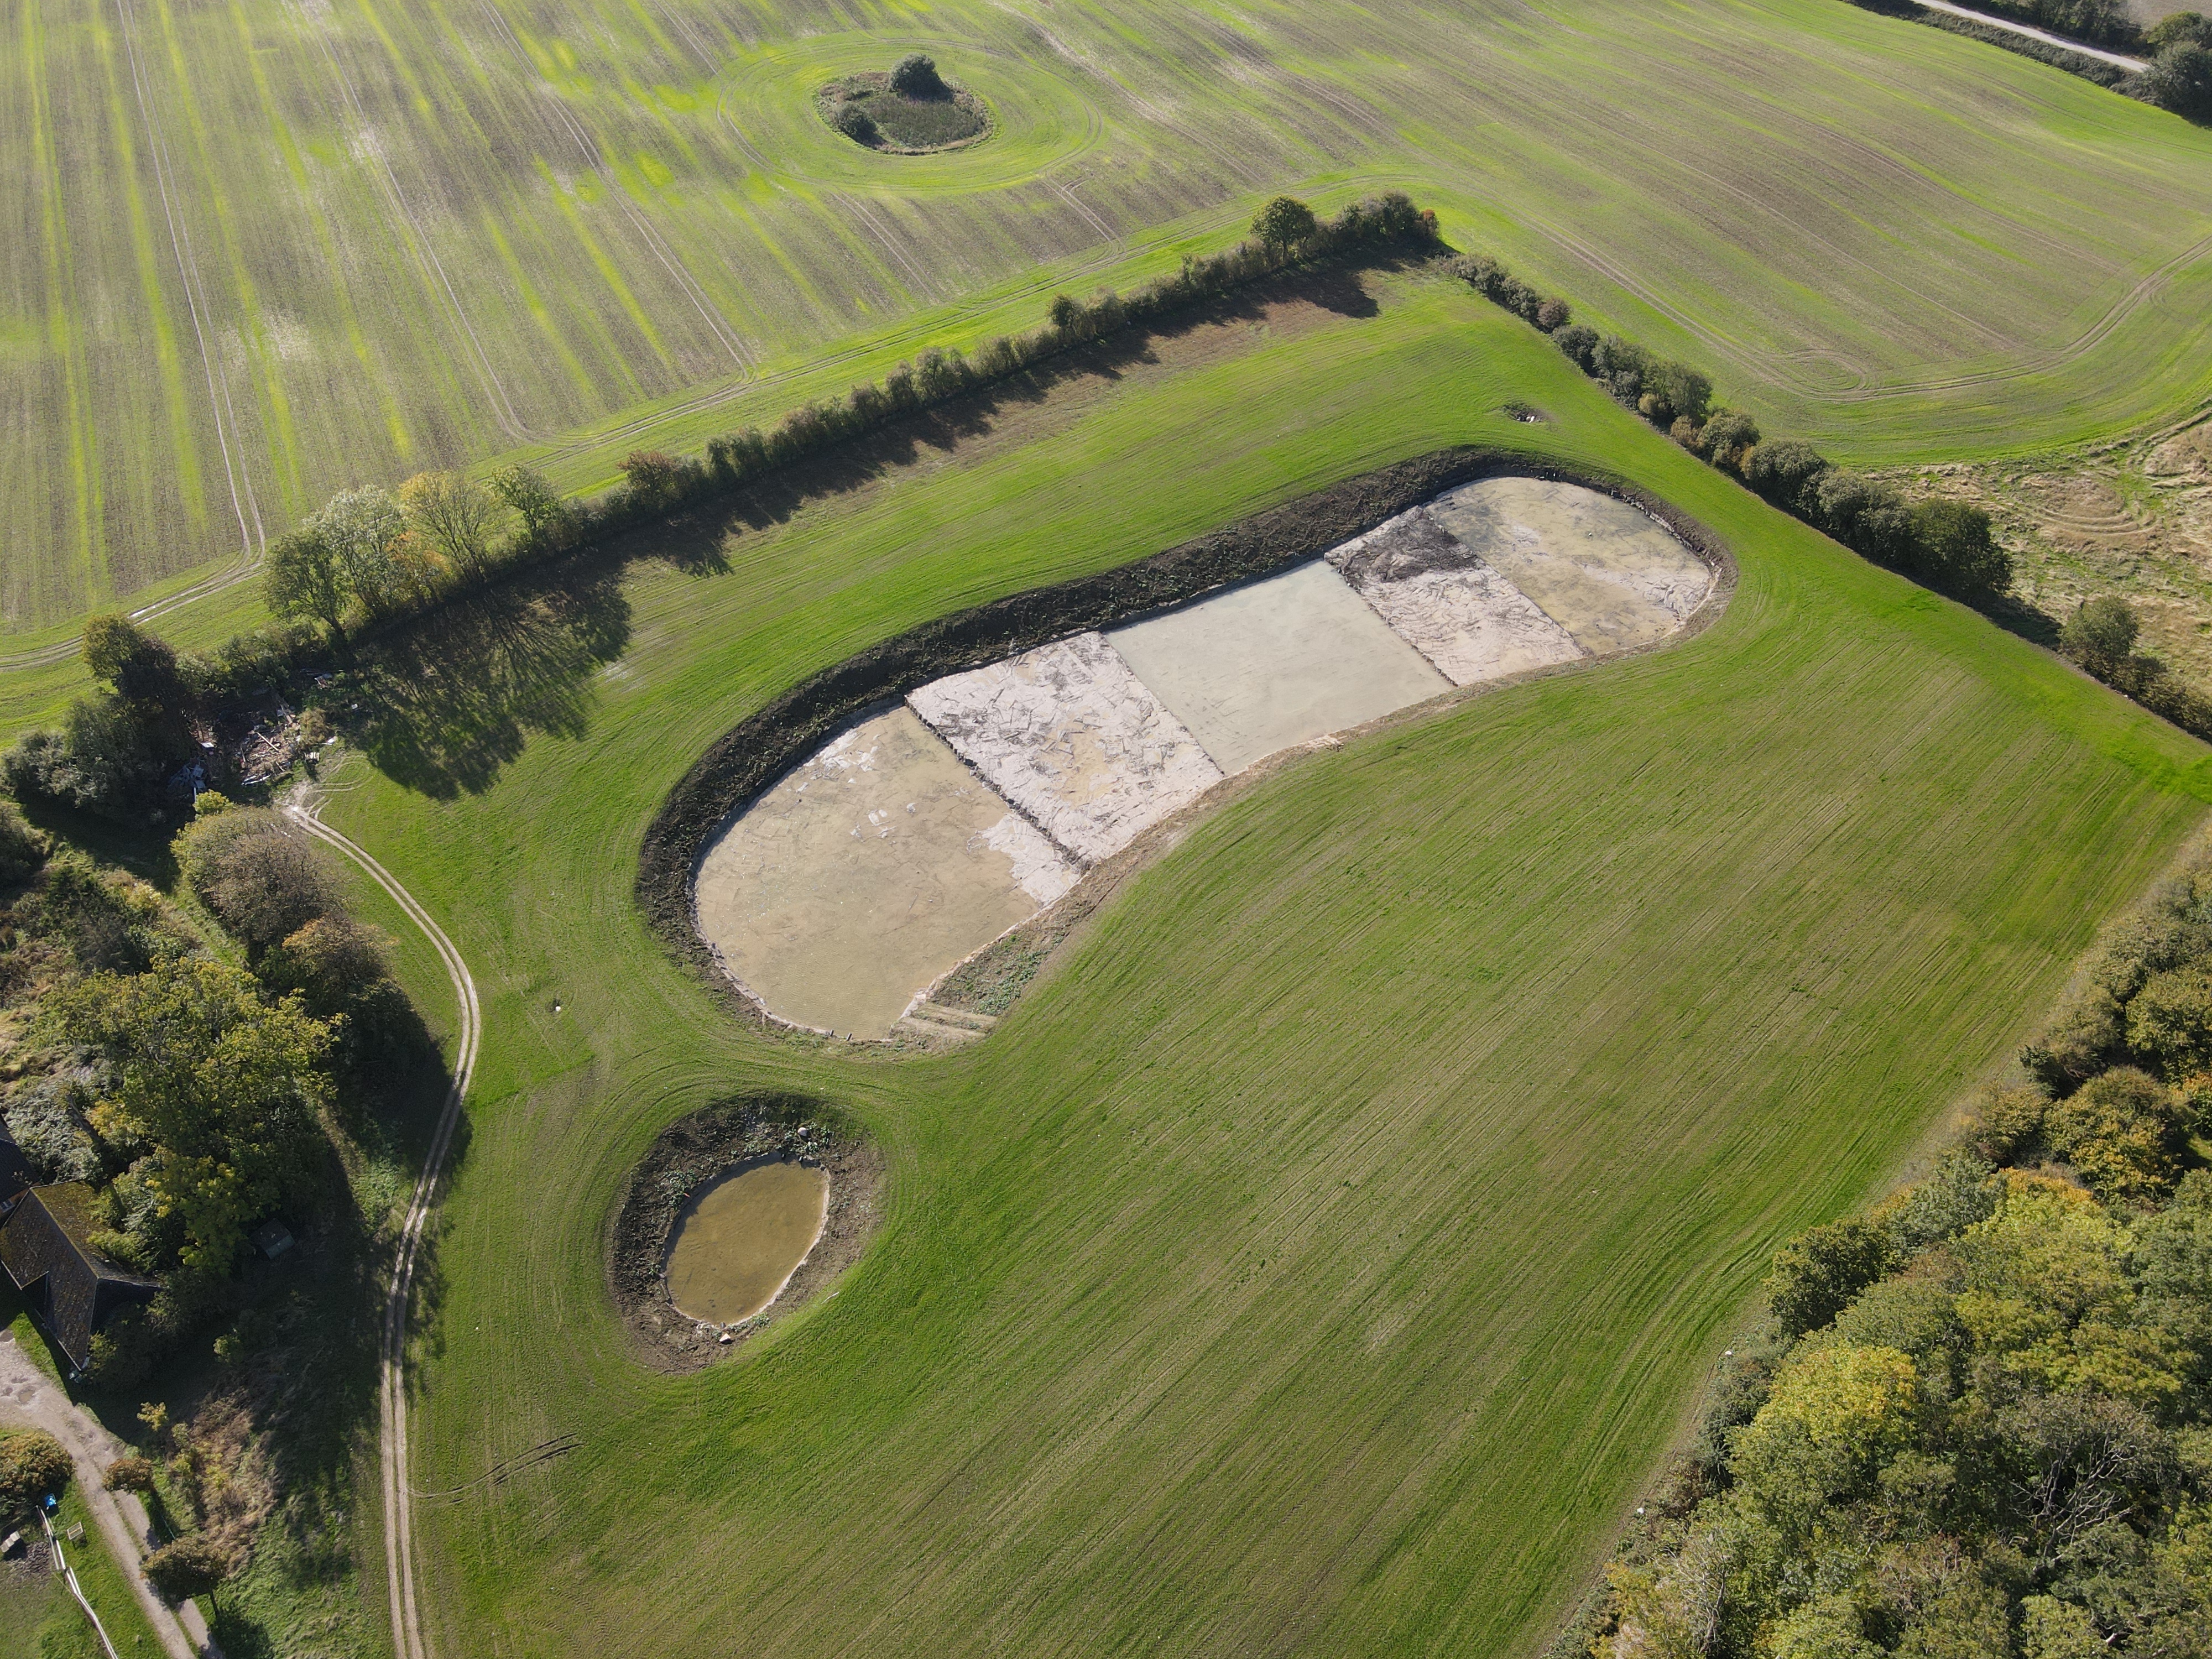 Milcotec's mini wetland seen from the air